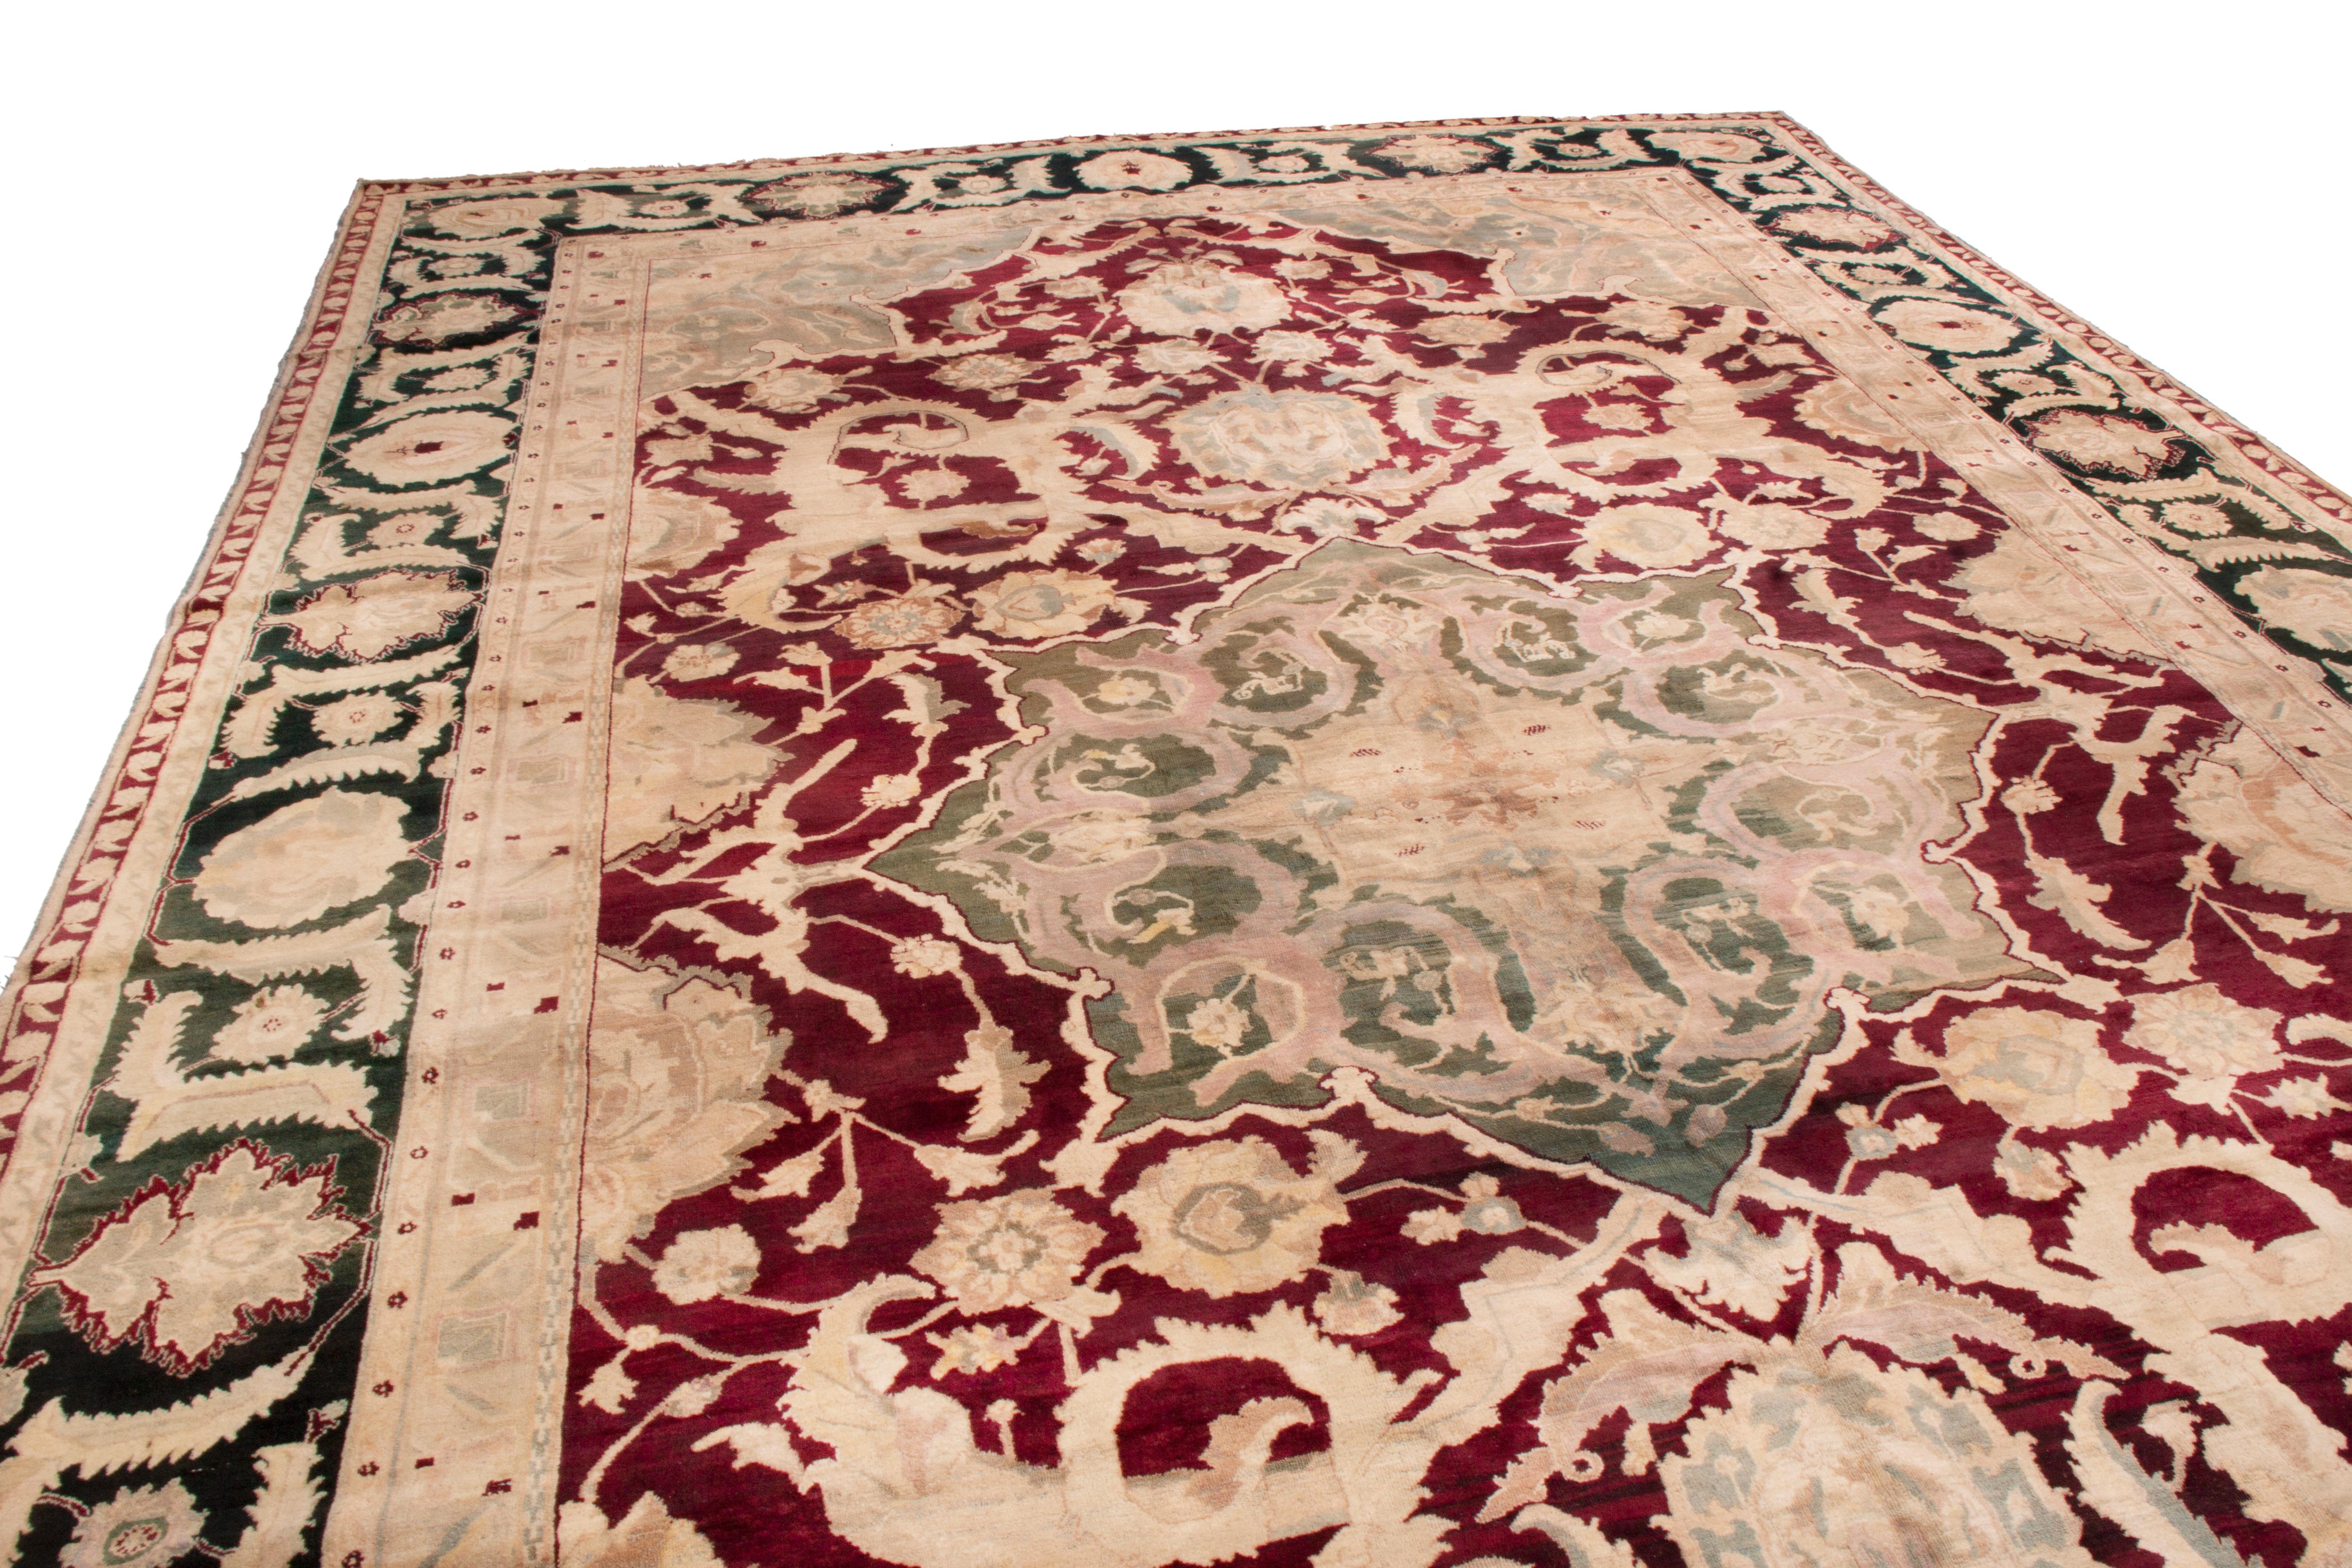 This antique traditional Agra rug has an all-over floral pattern, uniquely resembling Polonaise rug designs of the 17th century. From 1880-1900, this Agra is one among a family made by during British influence in India, mixing English and Indian